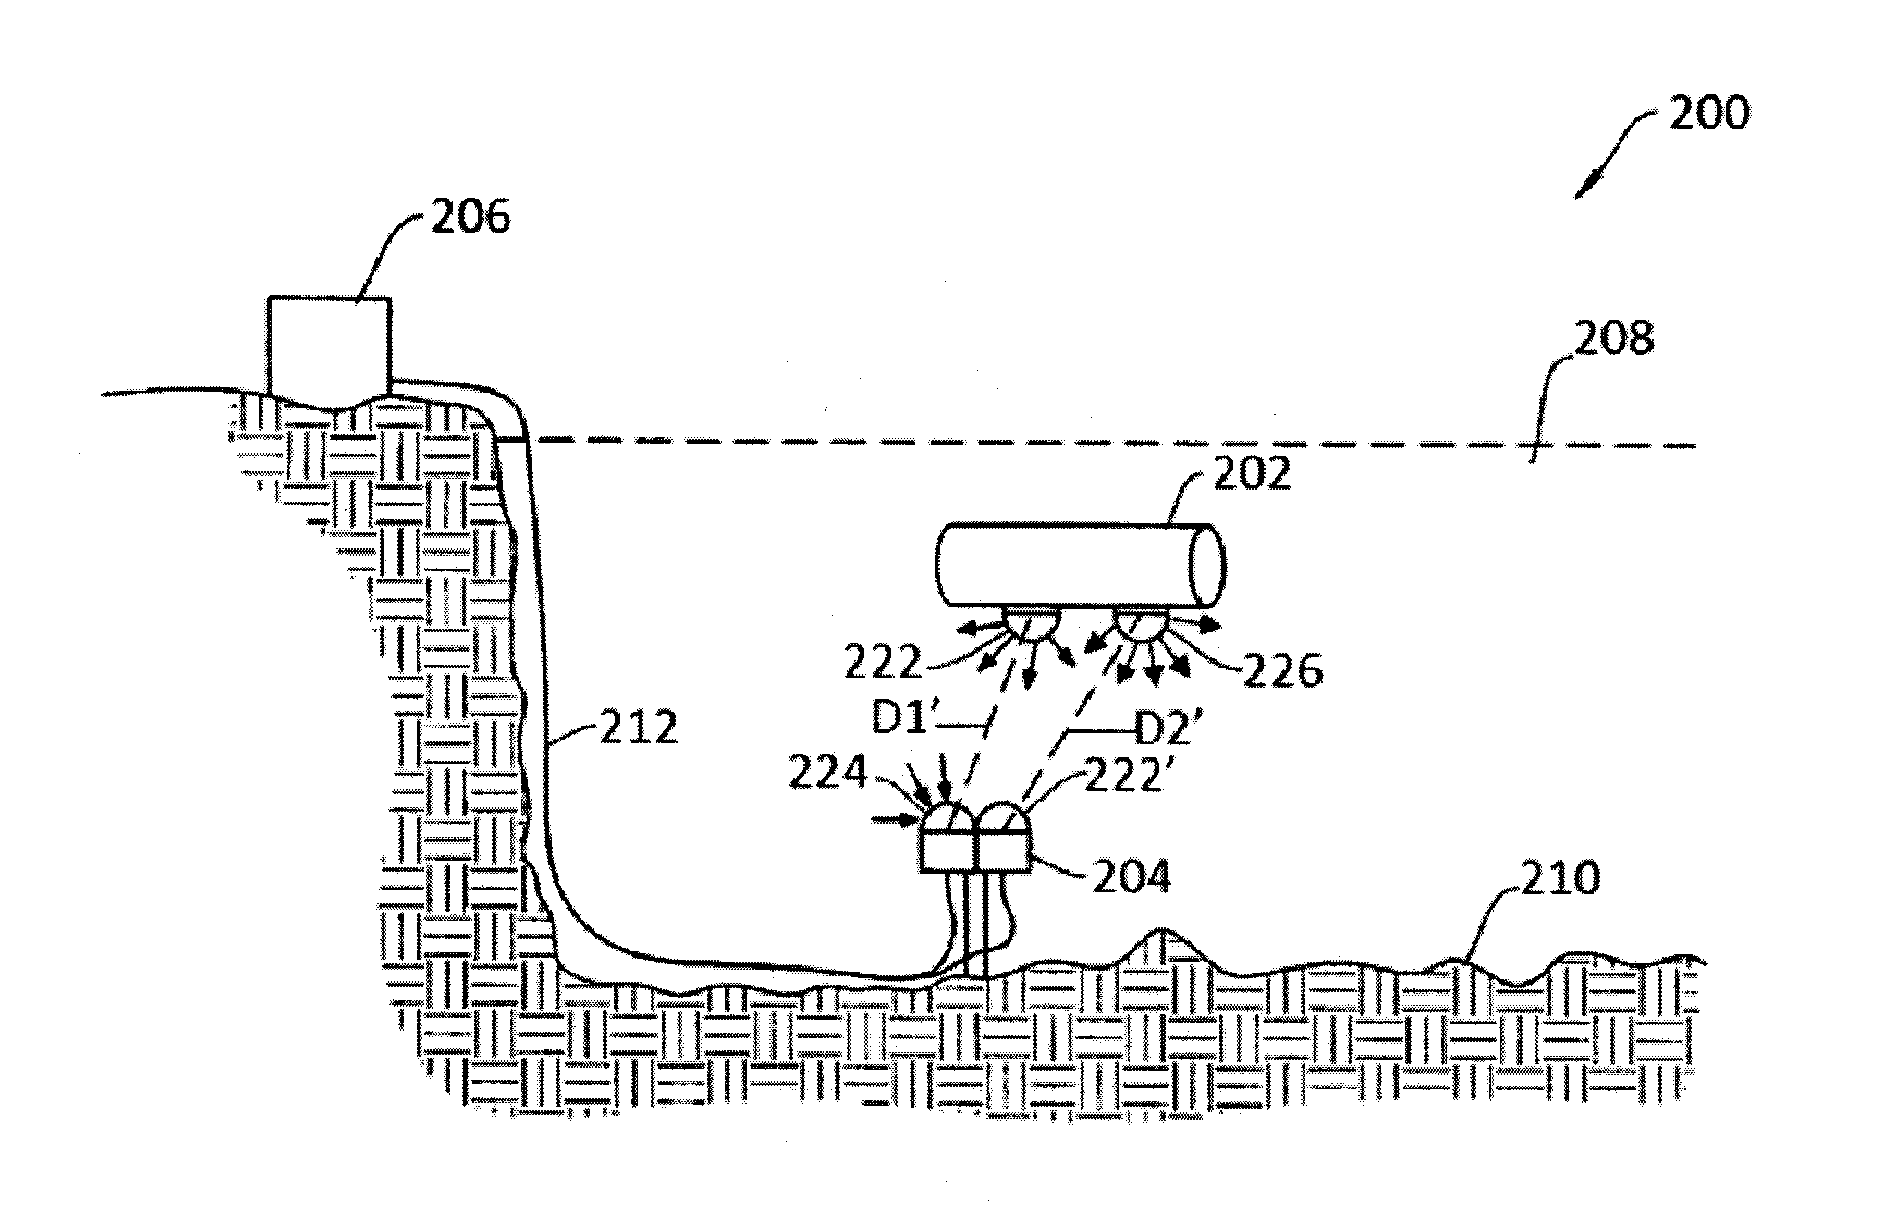 Optical Communication Systems and Methods